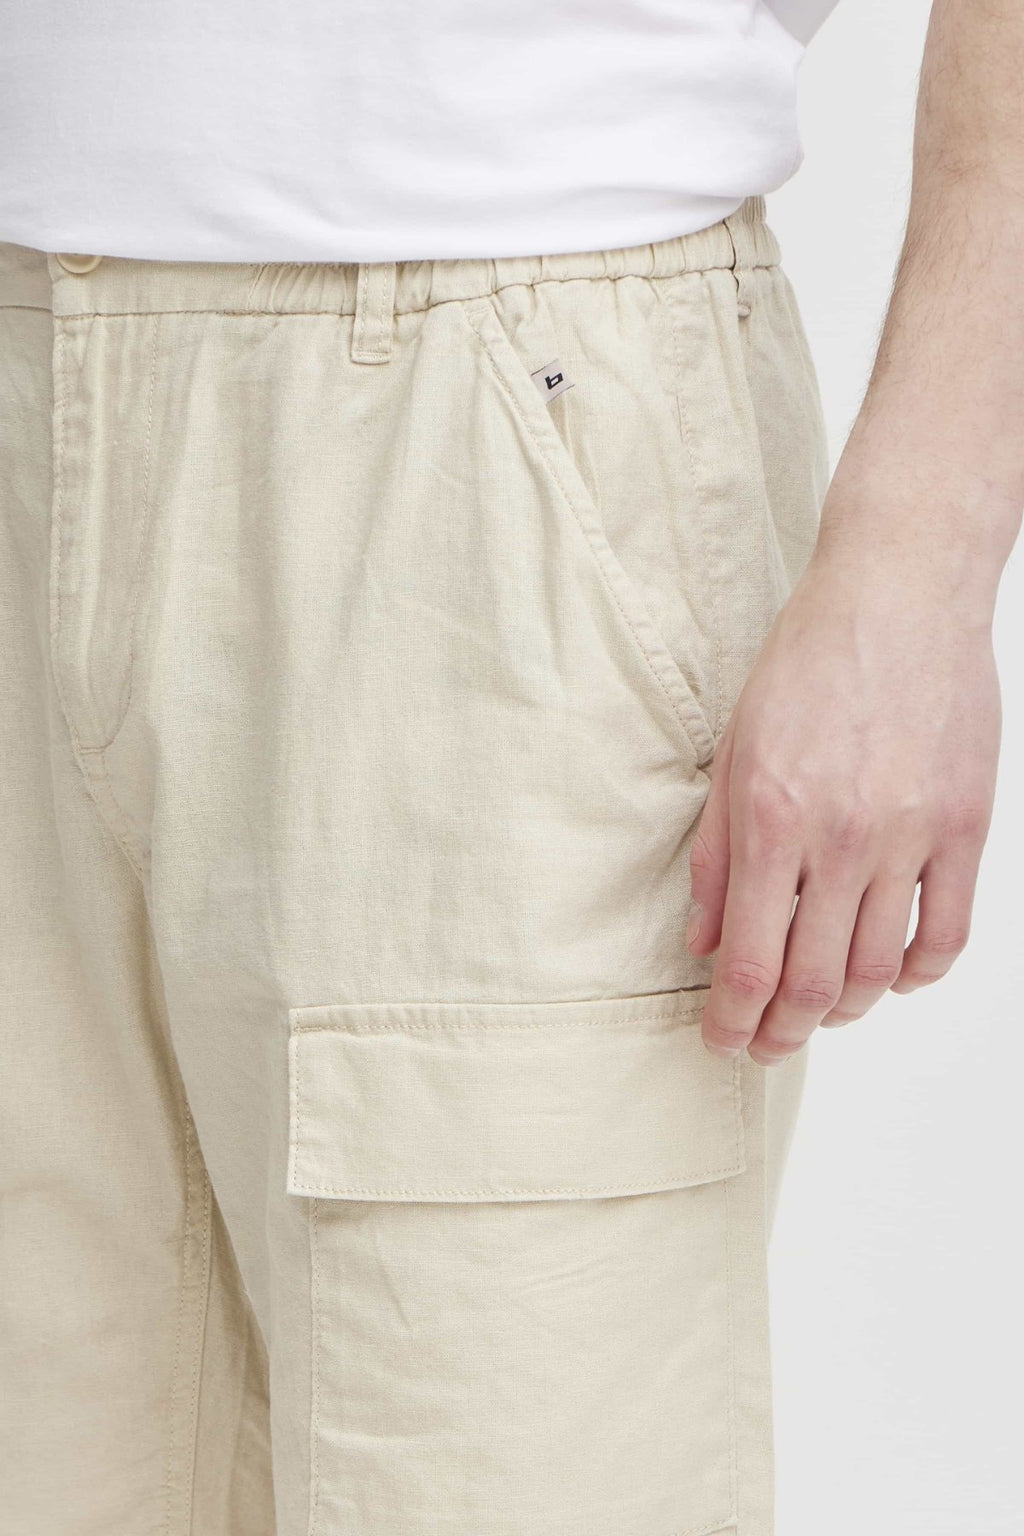 Cargo λινό Shorts - Oyster Gray